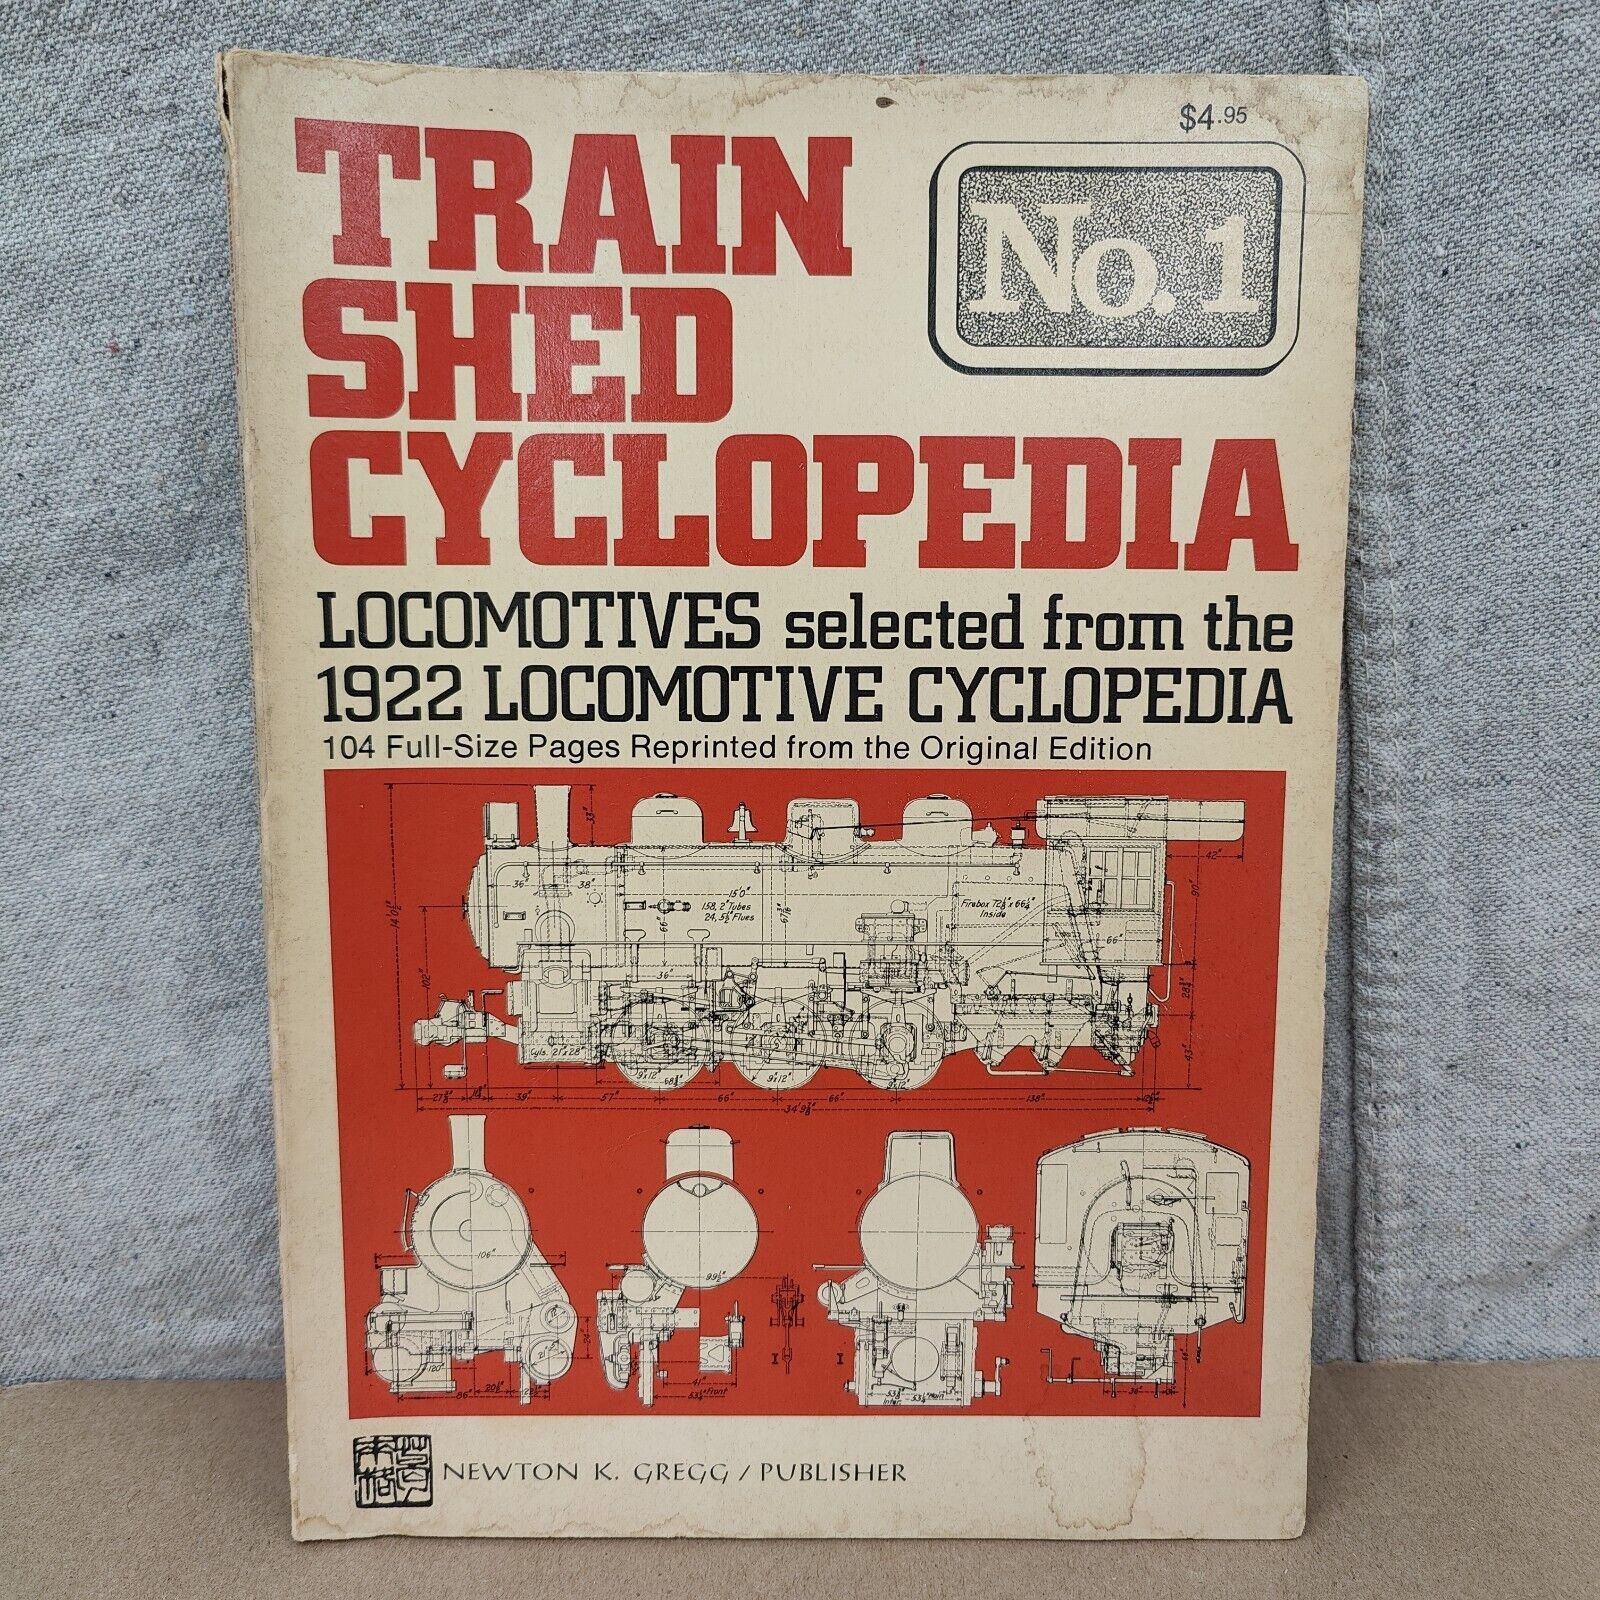 Train Shed Cyclopedia Locomotive Selected From The 1922 Locomotive Cyclopedia